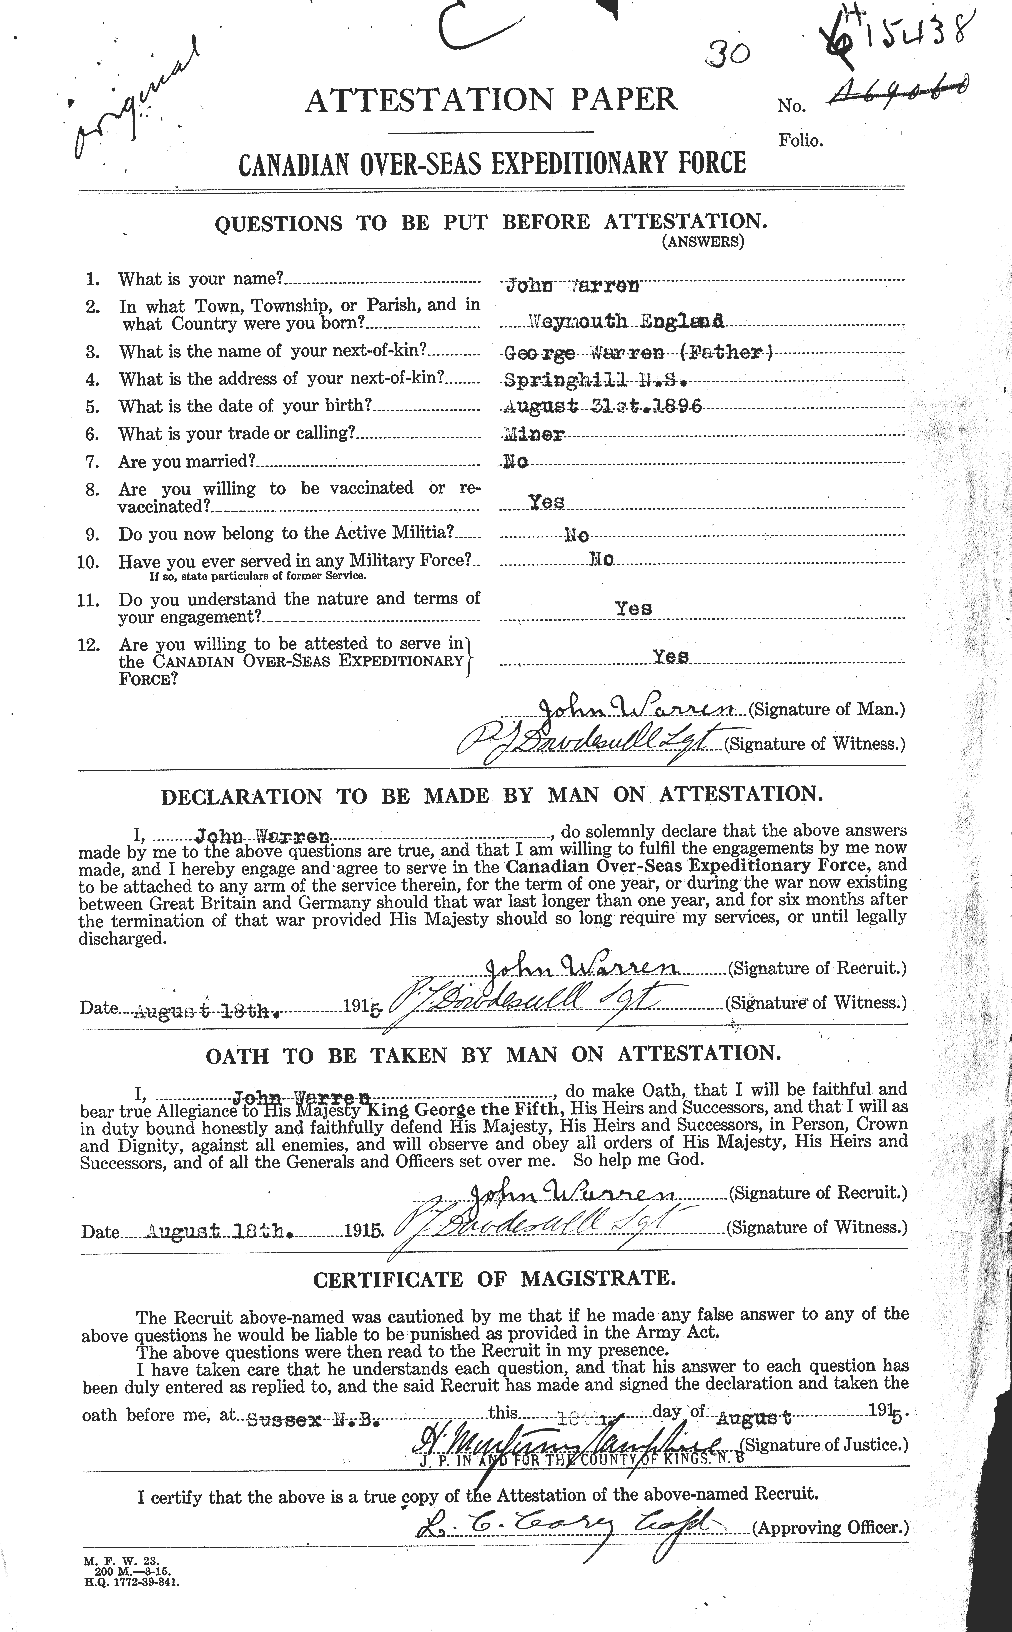 Personnel Records of the First World War - CEF 658535a